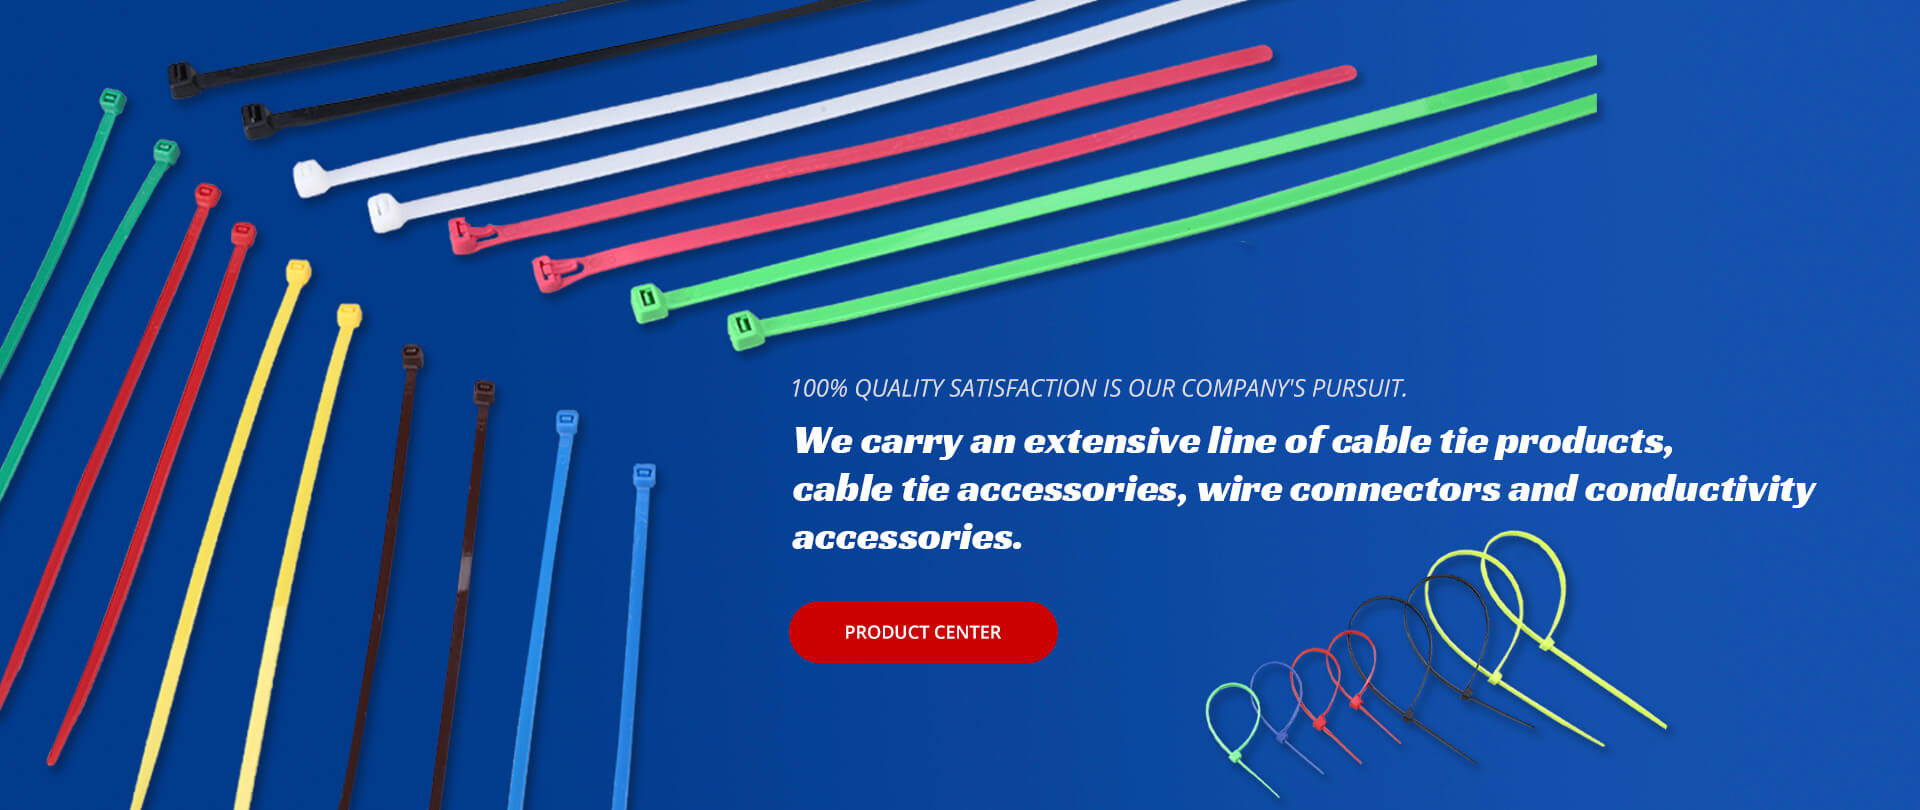 an extensive line of cable tie products